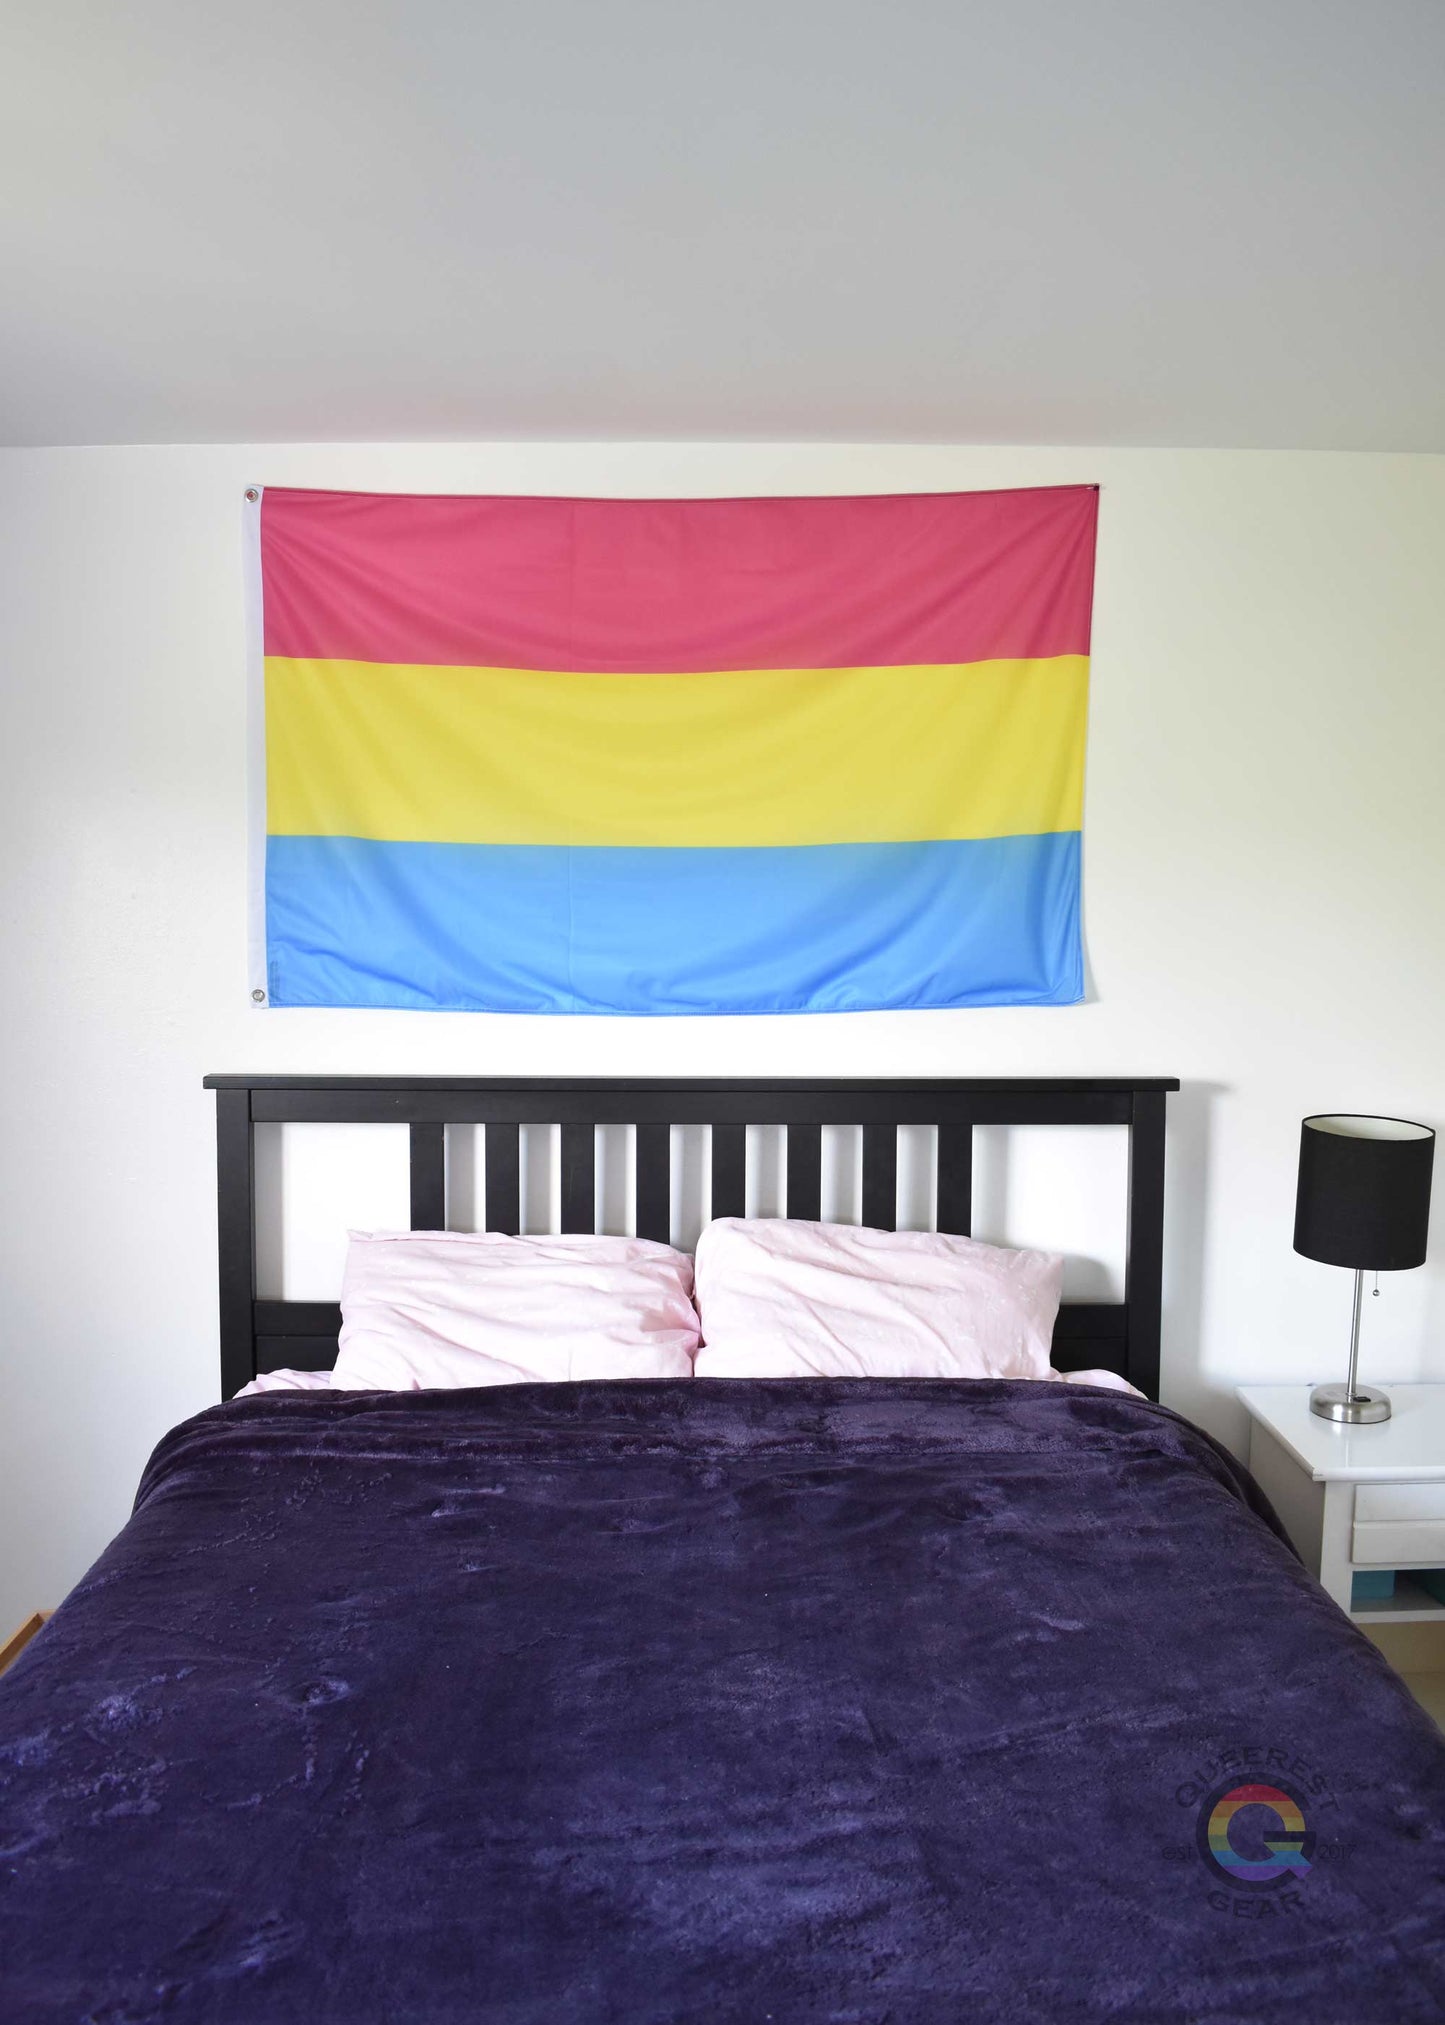 3’x5’ pansexual pride flag hanging horizontally on the wall of a bedroom centered above a bed with a purple blanket